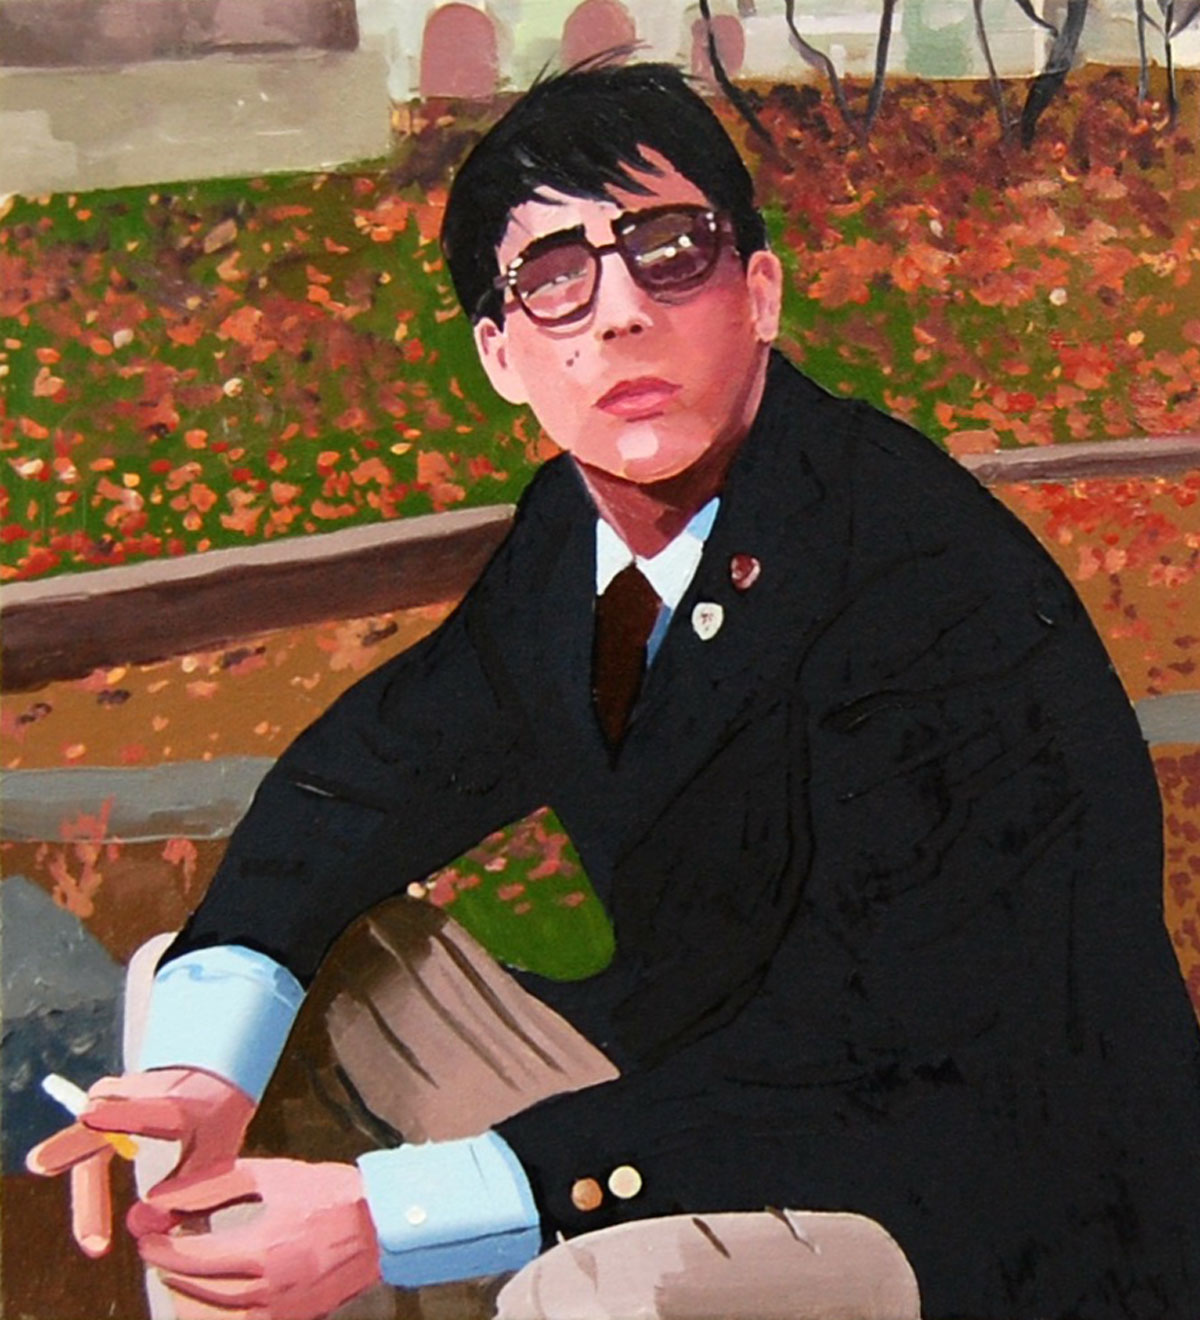 Seated man in a suit with glasses smoking a cigarette